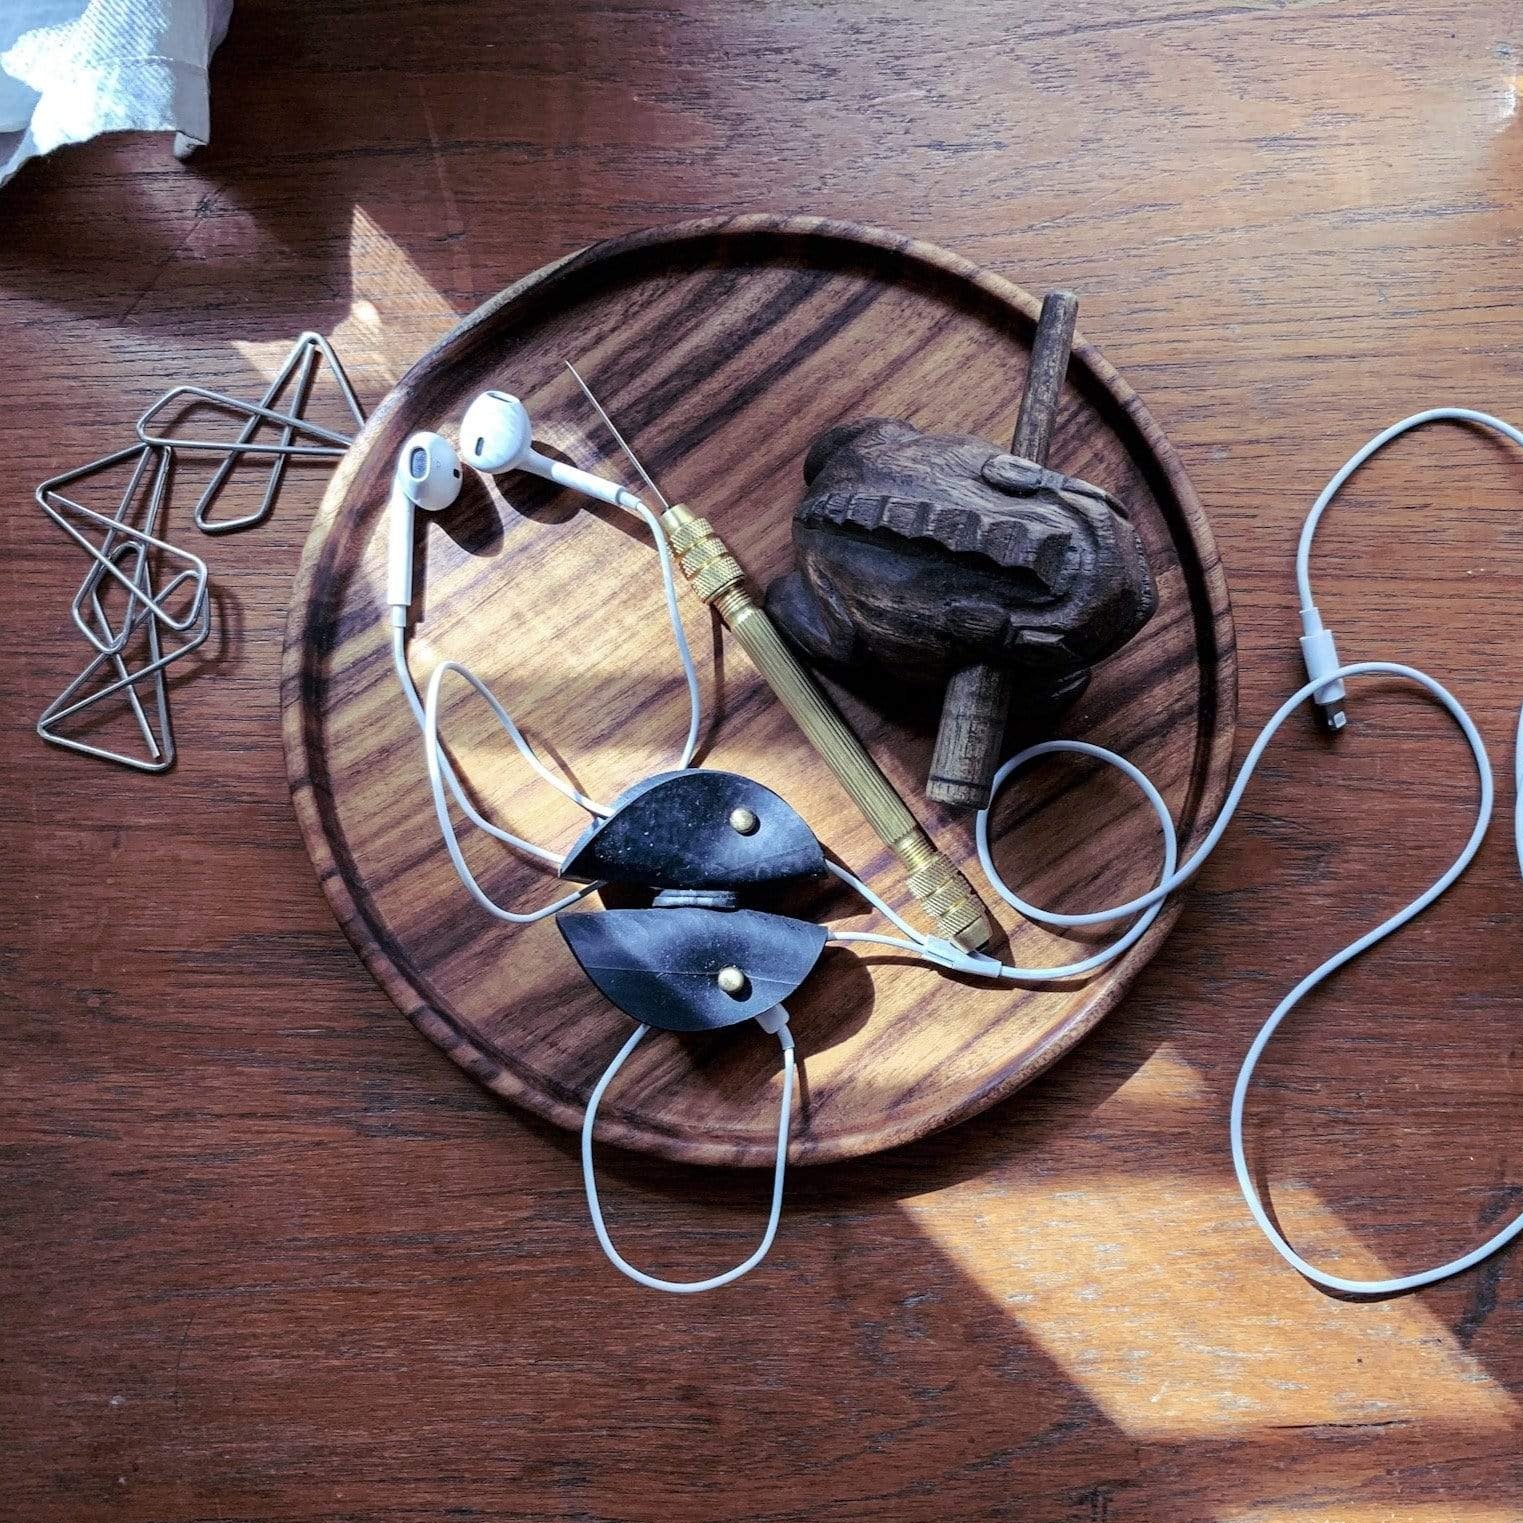 Upcycled Ear phone Organisers - The Second Life India